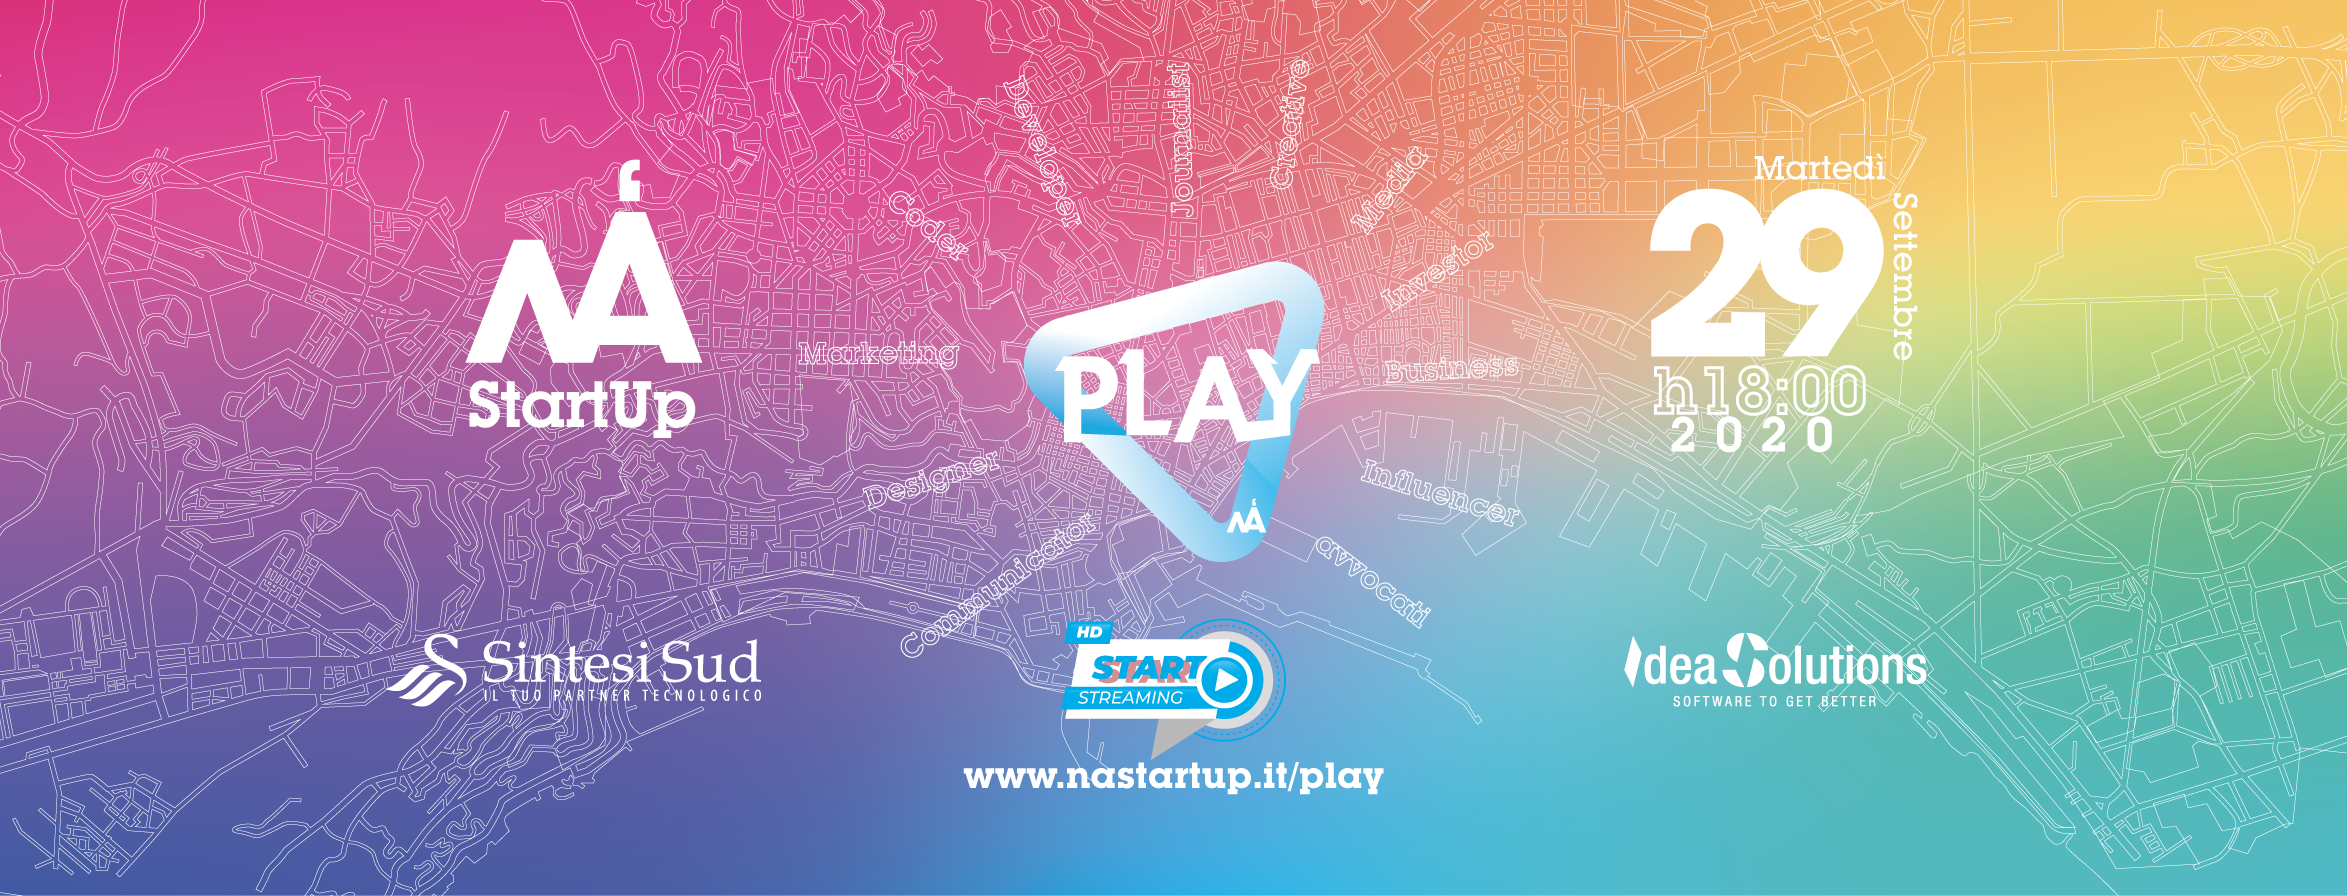 NA StartUp Play 006 Settembre2020